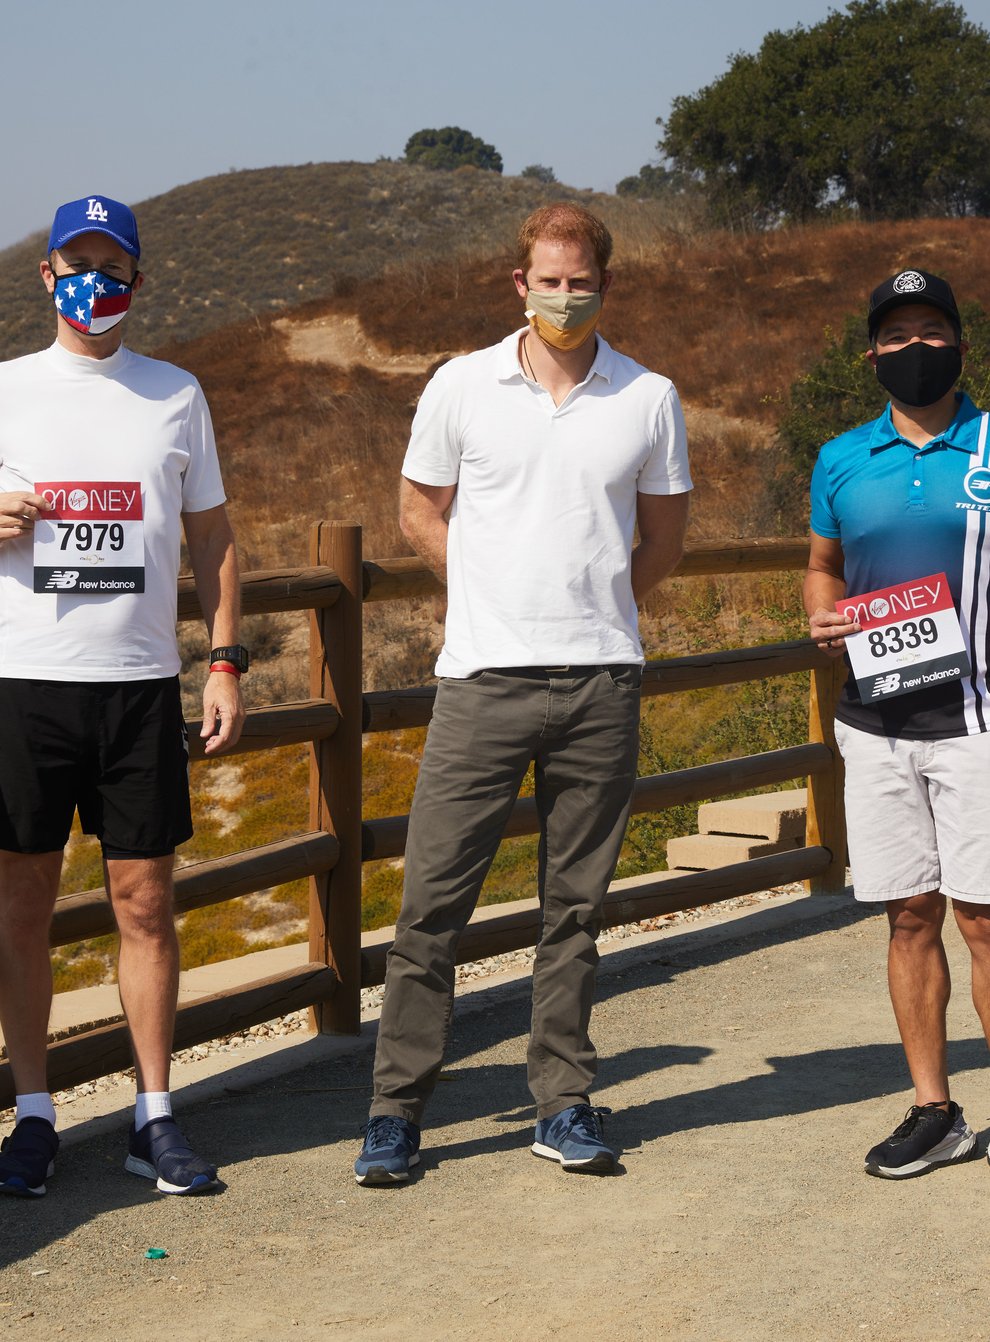 The Duke of Sussex, patron of The London Marathon Charitable Trust, poses with runners in Los Angeles before they take on the virtual Virgin Money London Marathon